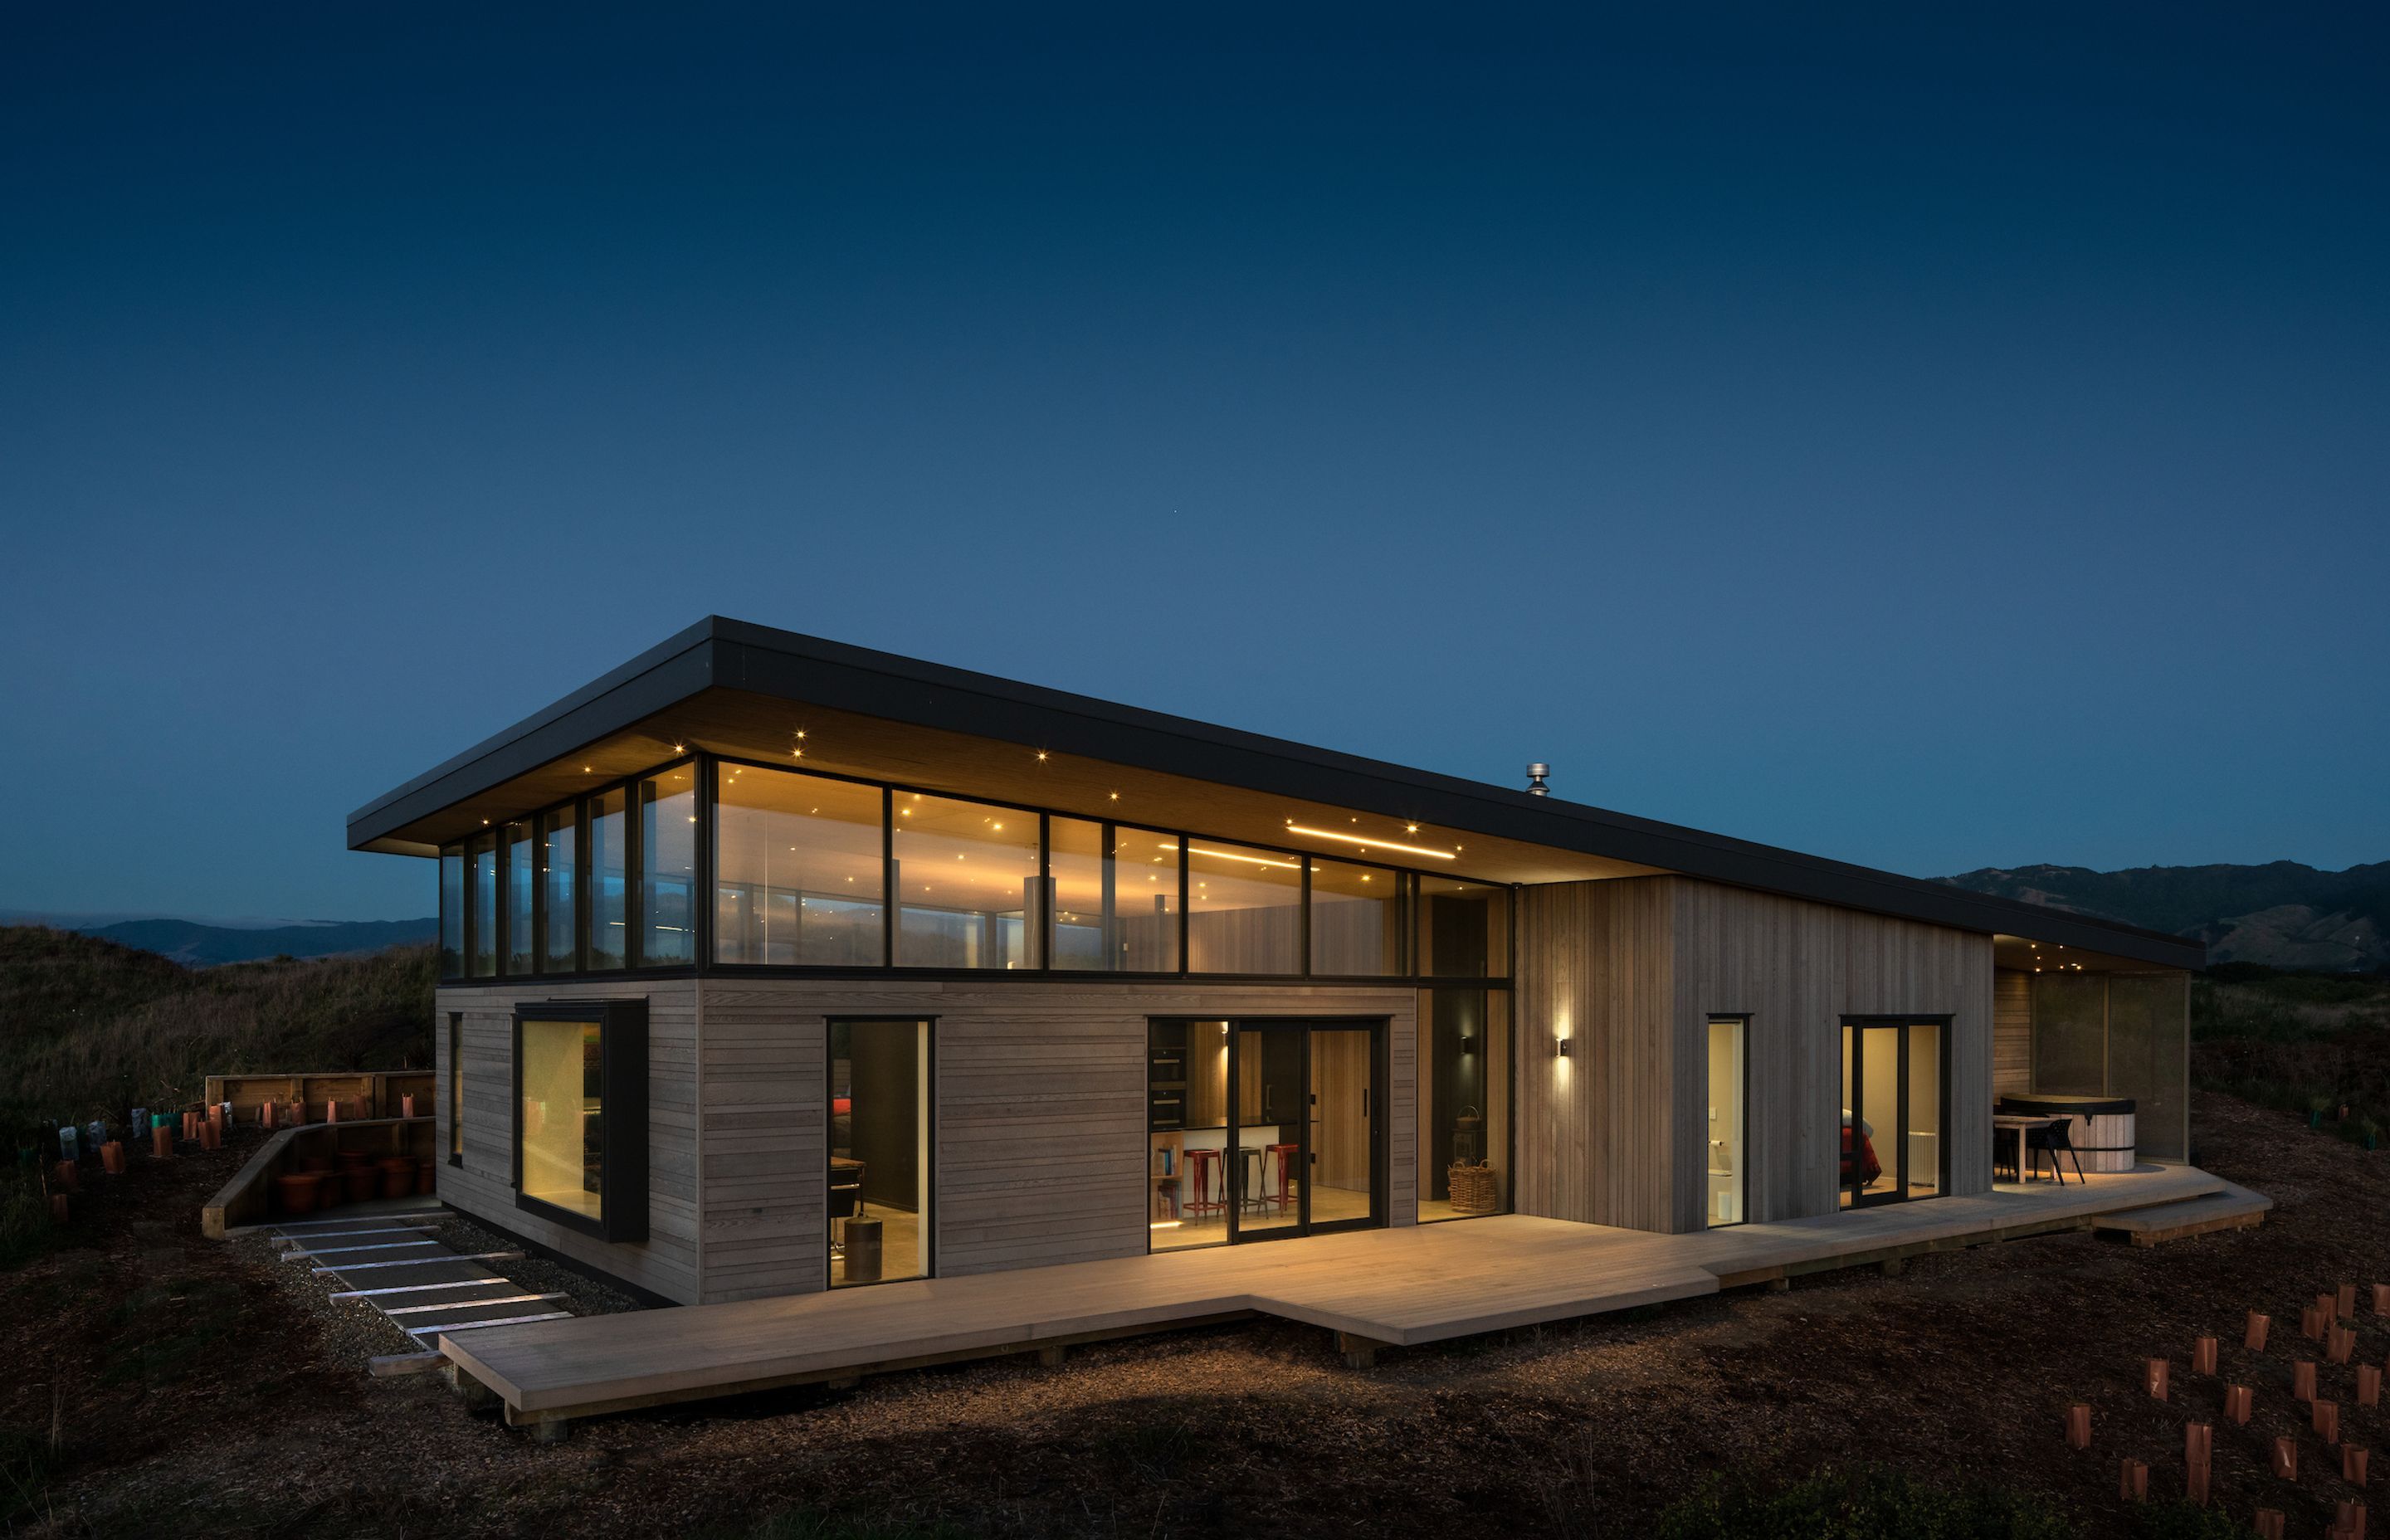 While the monopitched cantilevered roof helps mitigate solar gain, clerestory windows admit natural light and allow sight lines from within the building of the nearby Tararua Ranges.